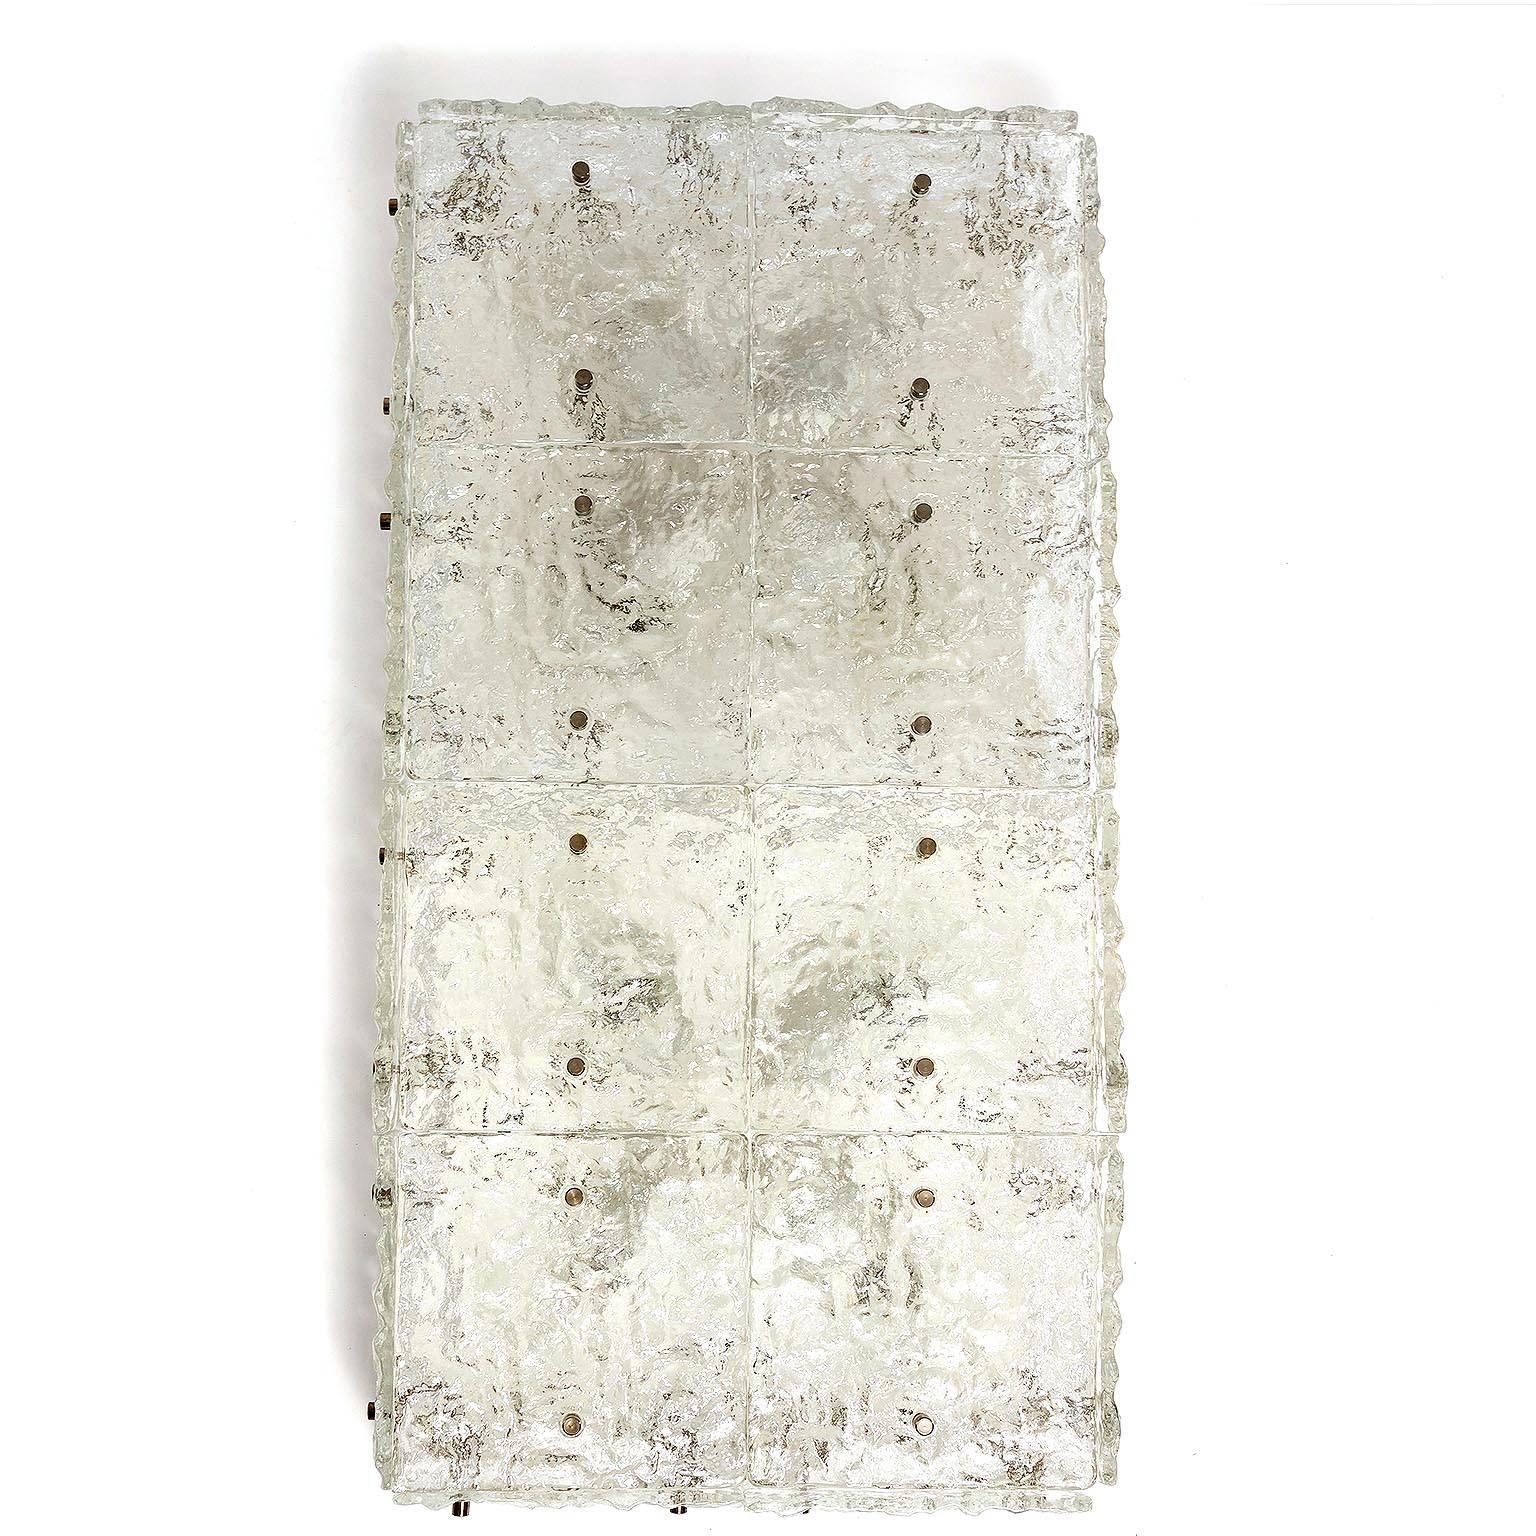 A large flush mount or wall light fixture modell 'Dachstein' by Kalmar, Austria, manufactured in midcentury, circa 1970 (late 1960s or early 1970s).
Frosted and textured glass elements are mounted with chrome or nickel bolts on a white metal